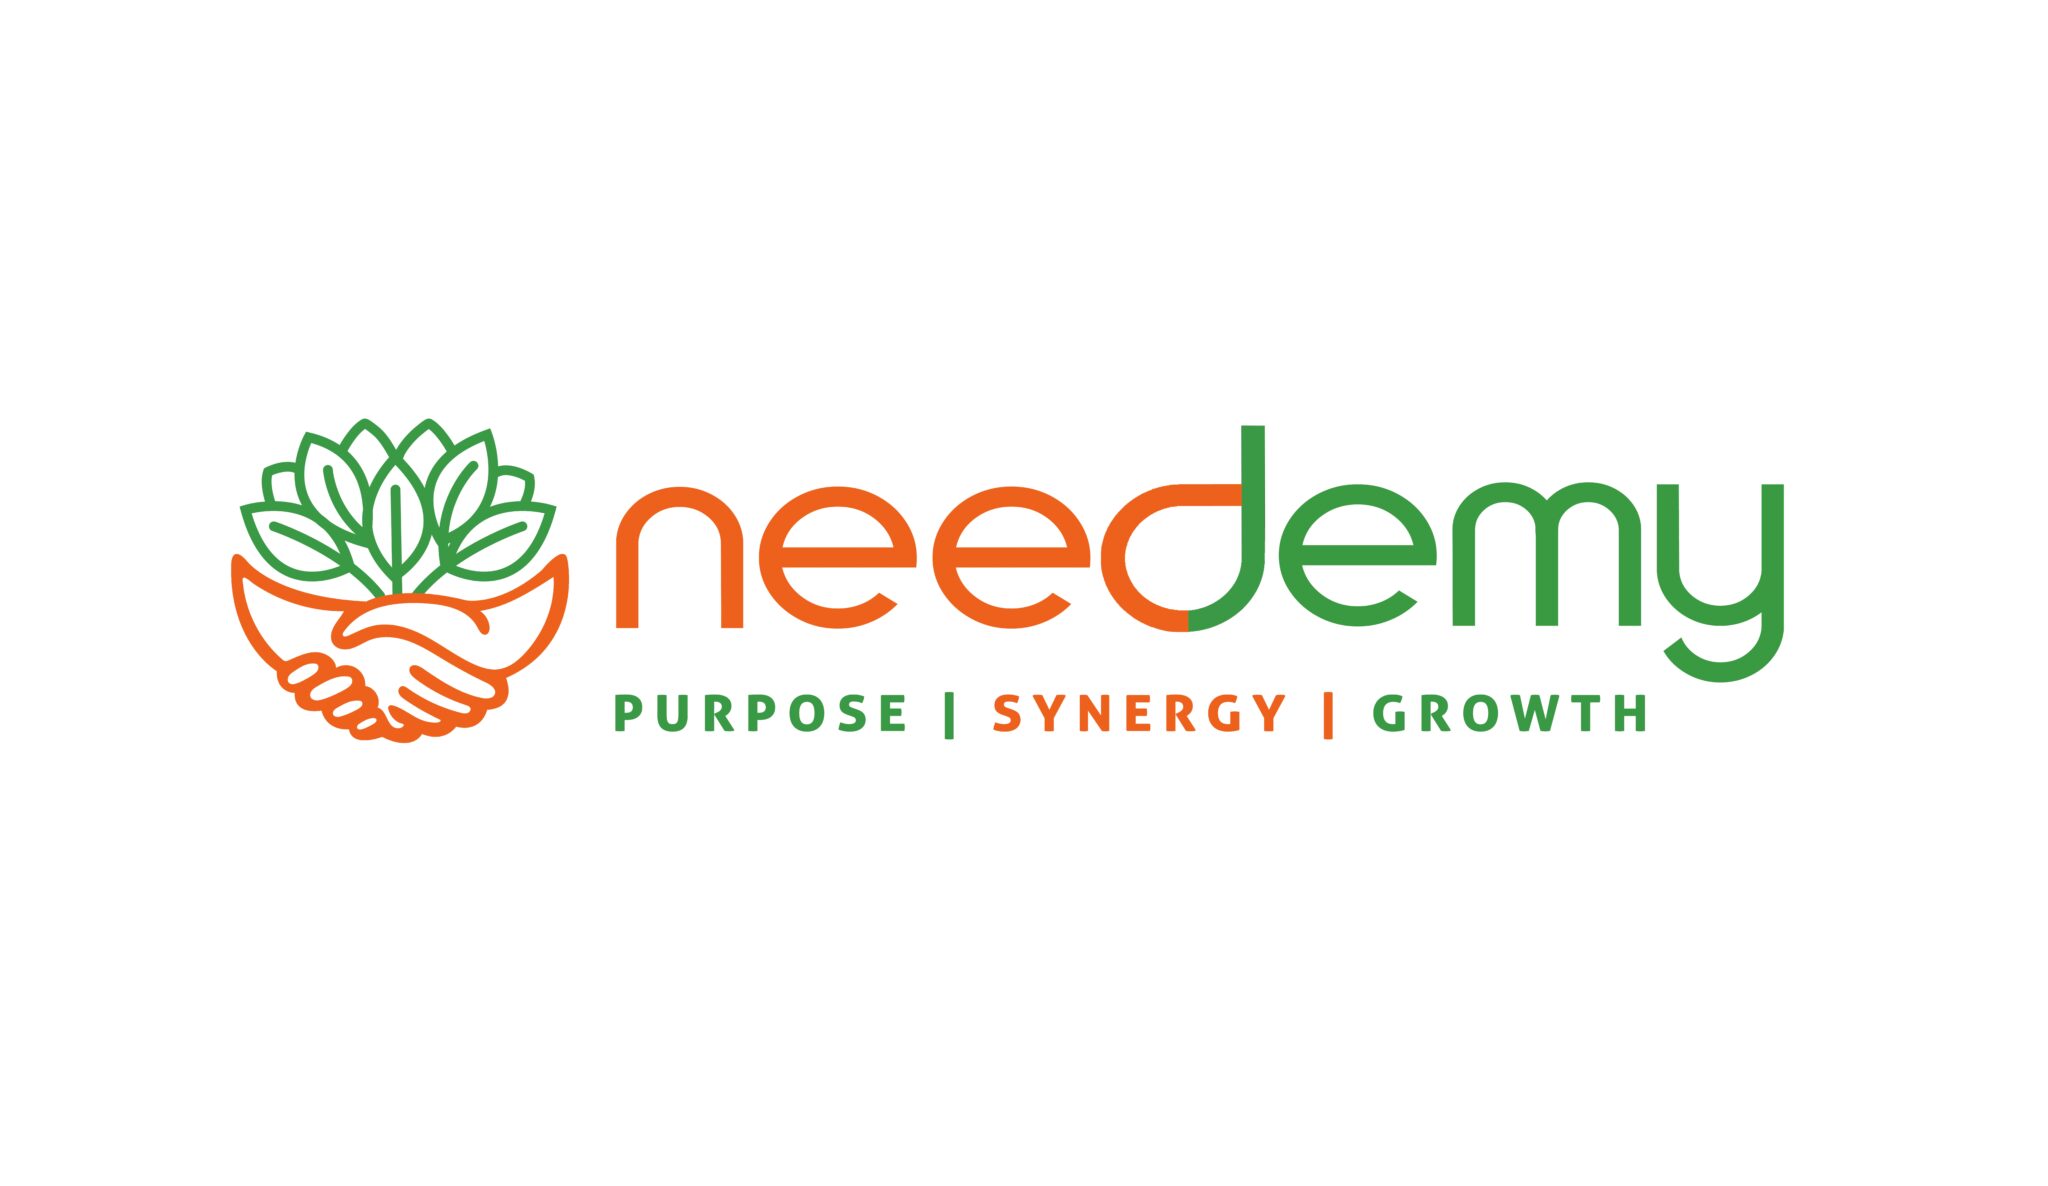 needemy white logo compressed 1.3 mb